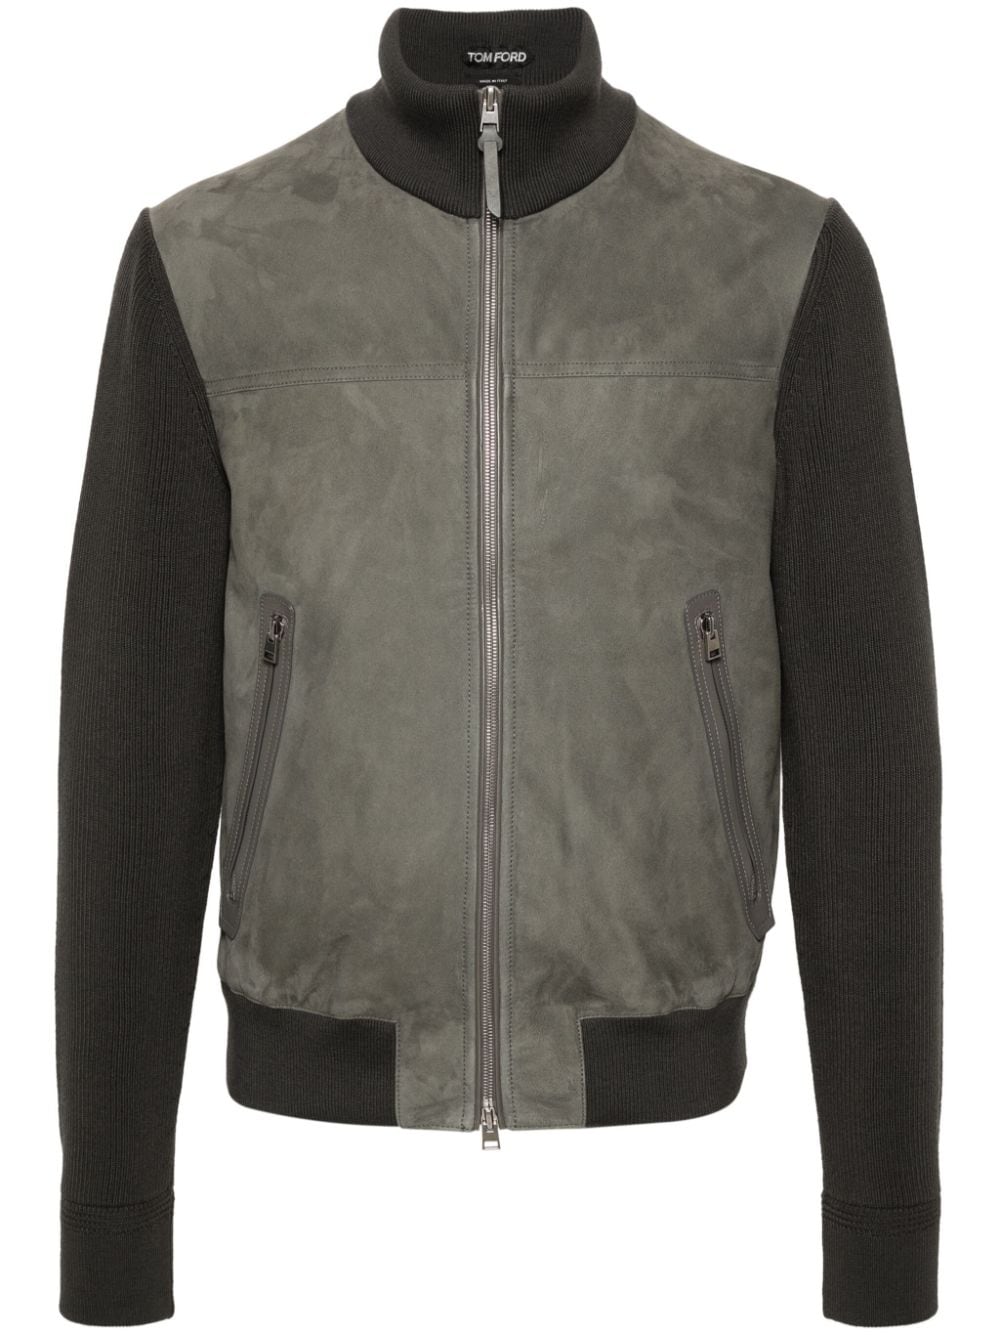 TOM FORD suede-panel zipped jacket - Grey von TOM FORD